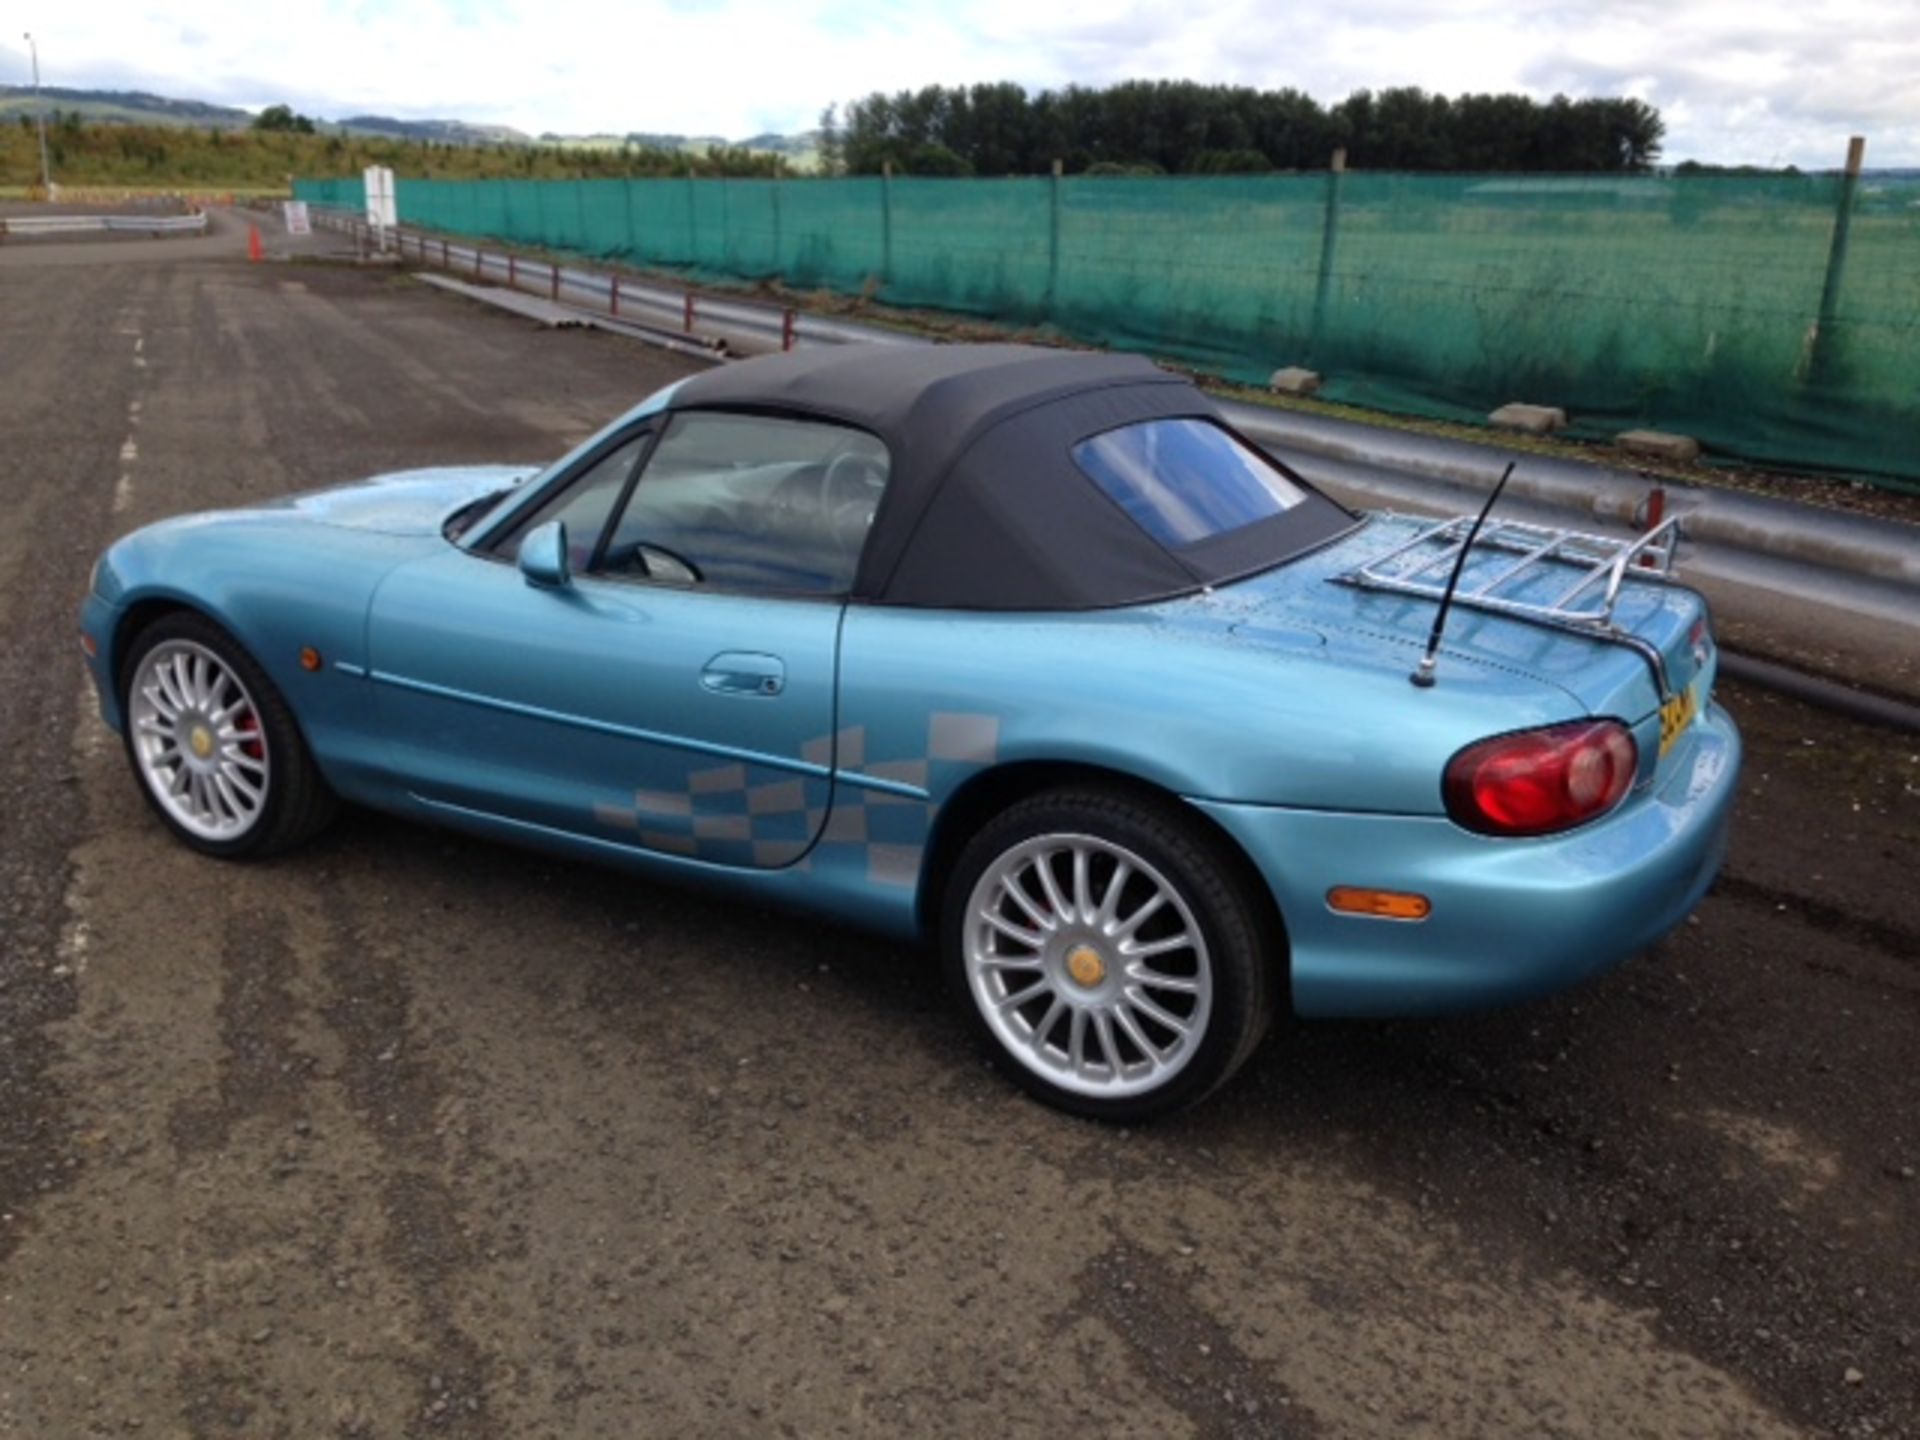 MAZDA, MX-5 1.8I - 1840cc, Chassis number JMZNB18P200223449 - presented in Crystal Blue Metallic, - Image 2 of 11